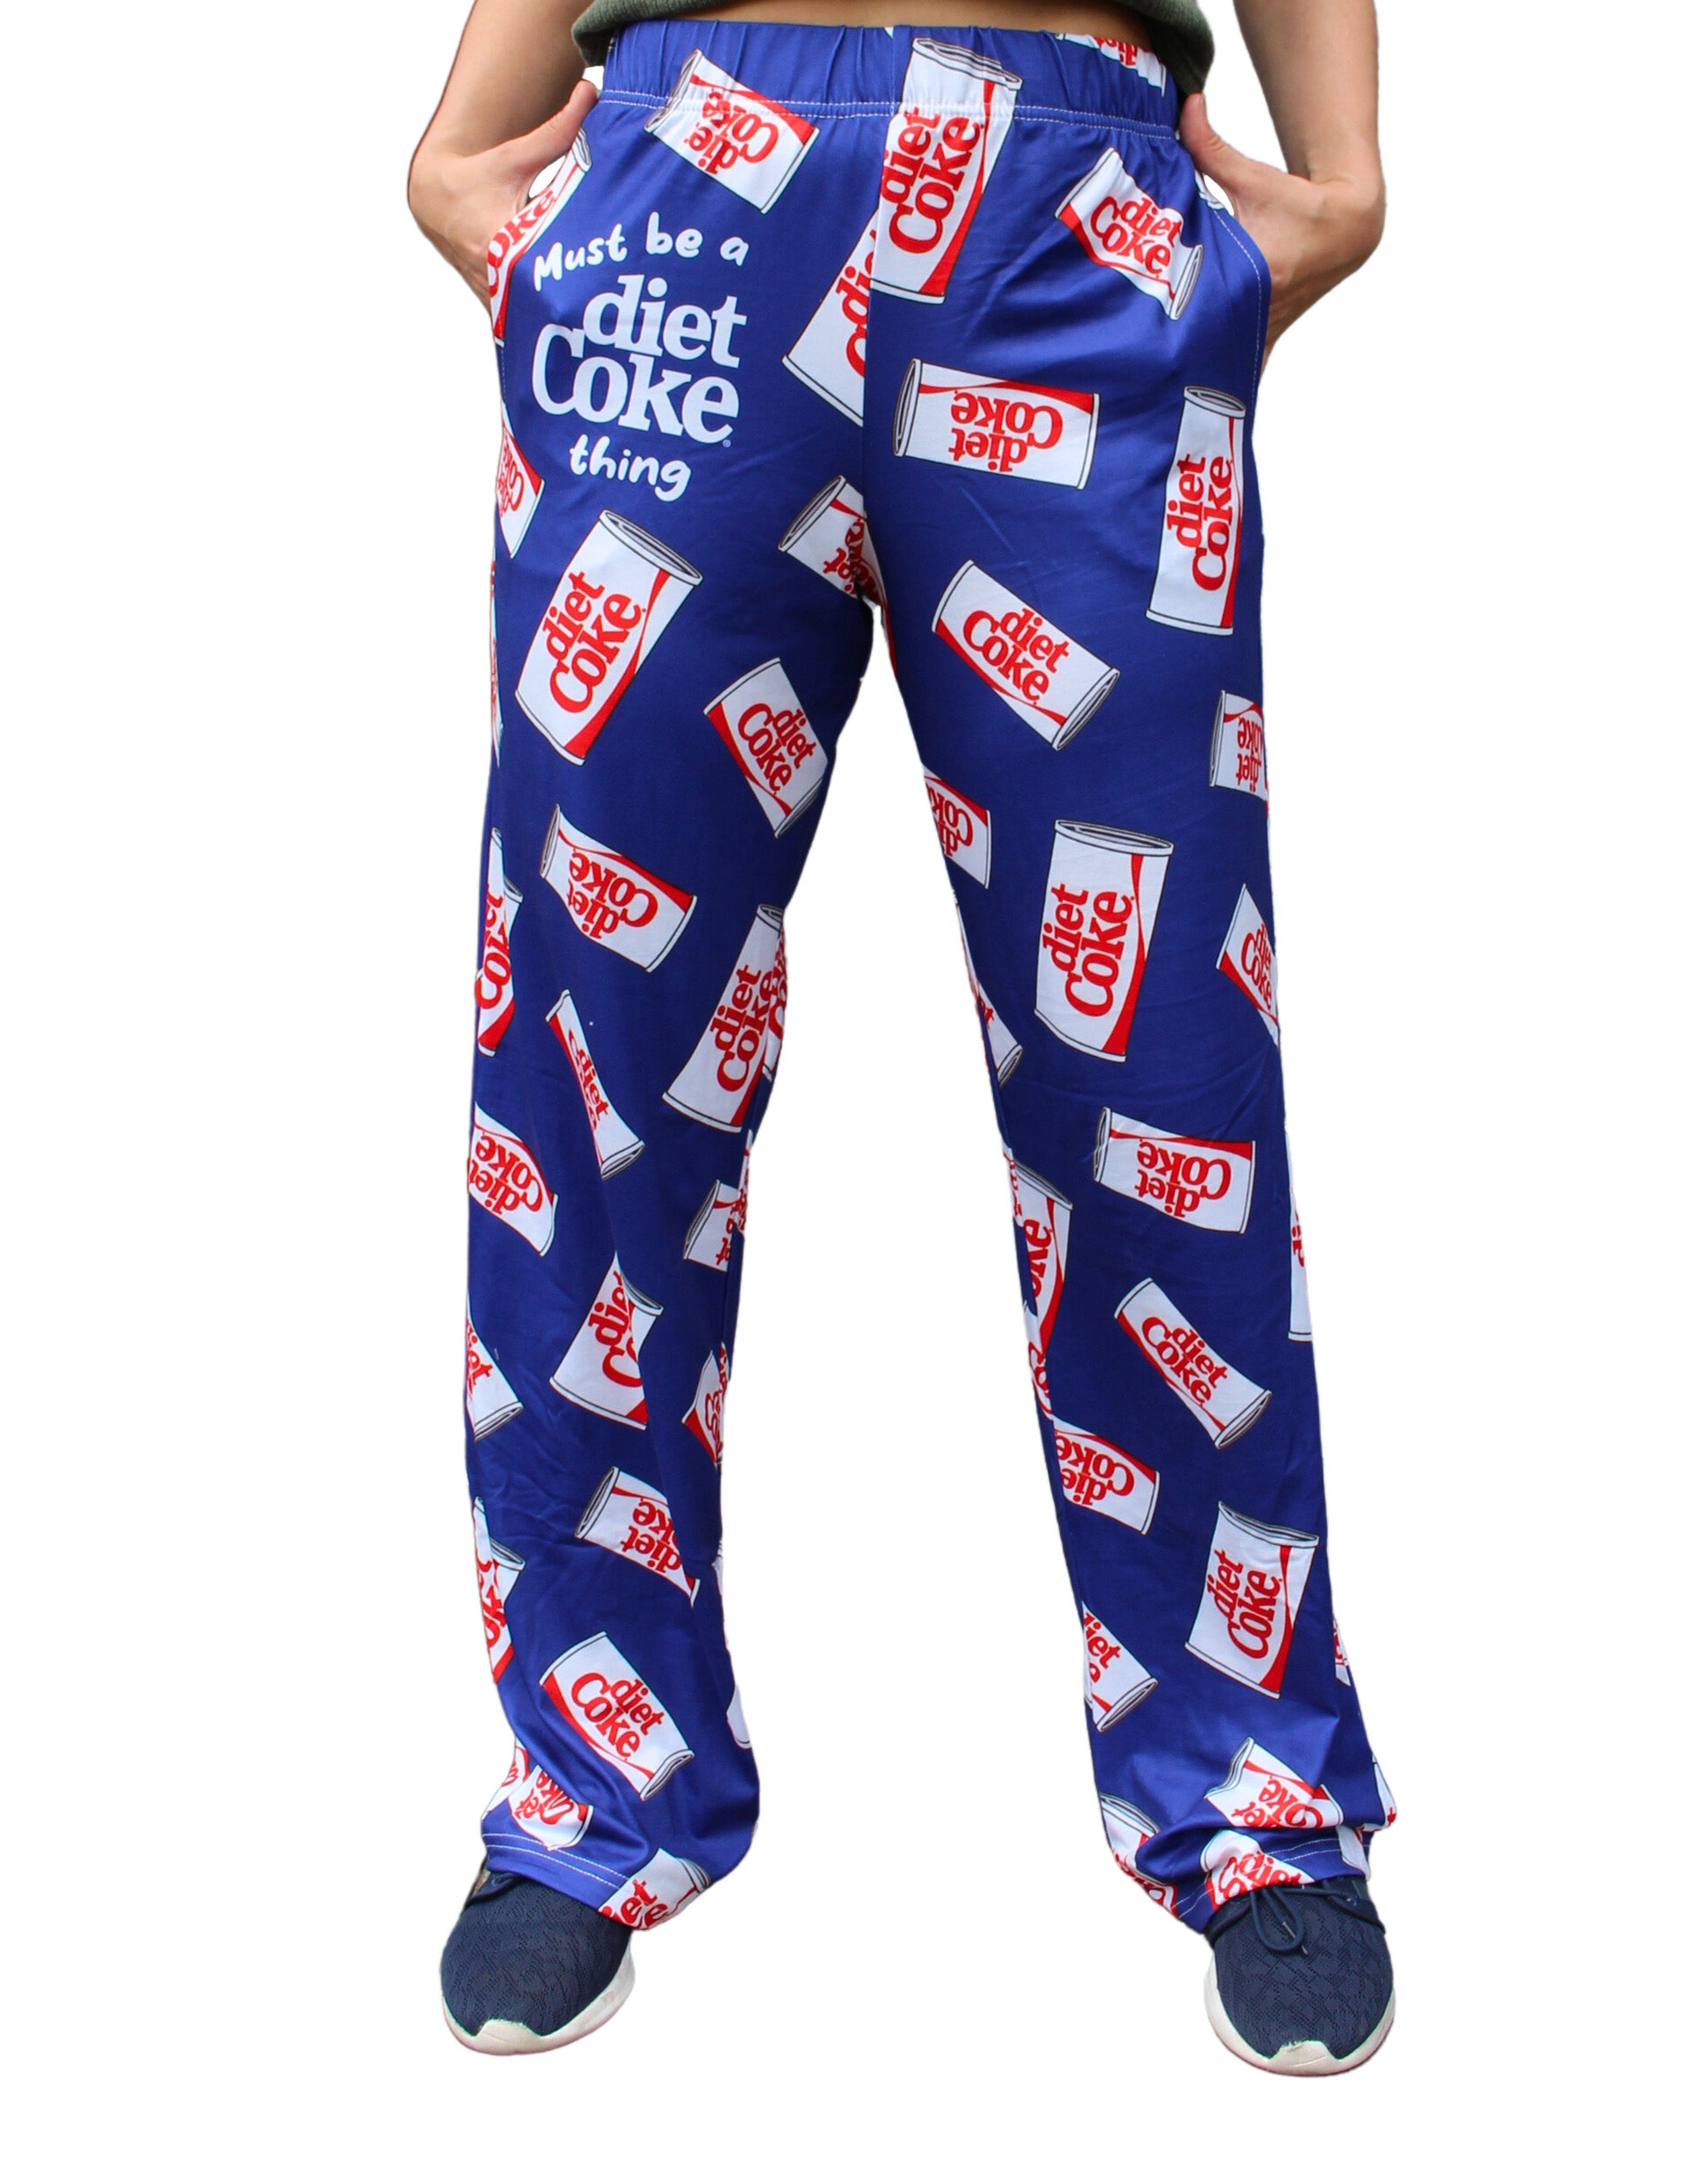 Diet Coke Pajama Lounge Pants on model front view